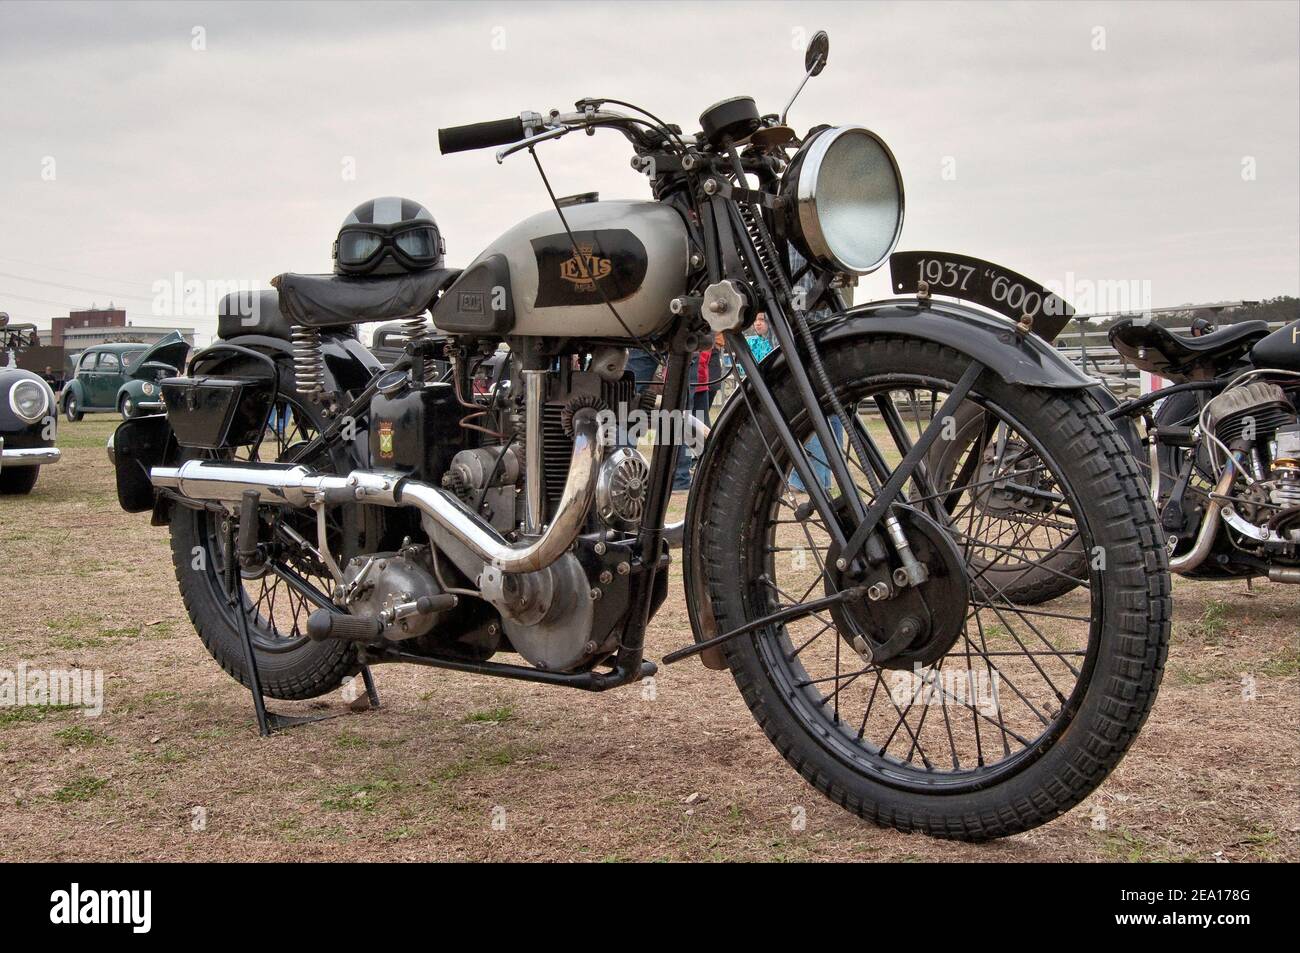 1937 Levis British motorcycle at Hot Rod Revolution car show at Camp Mabry  in Austin, Texas, USA Stock Photo - Alamy